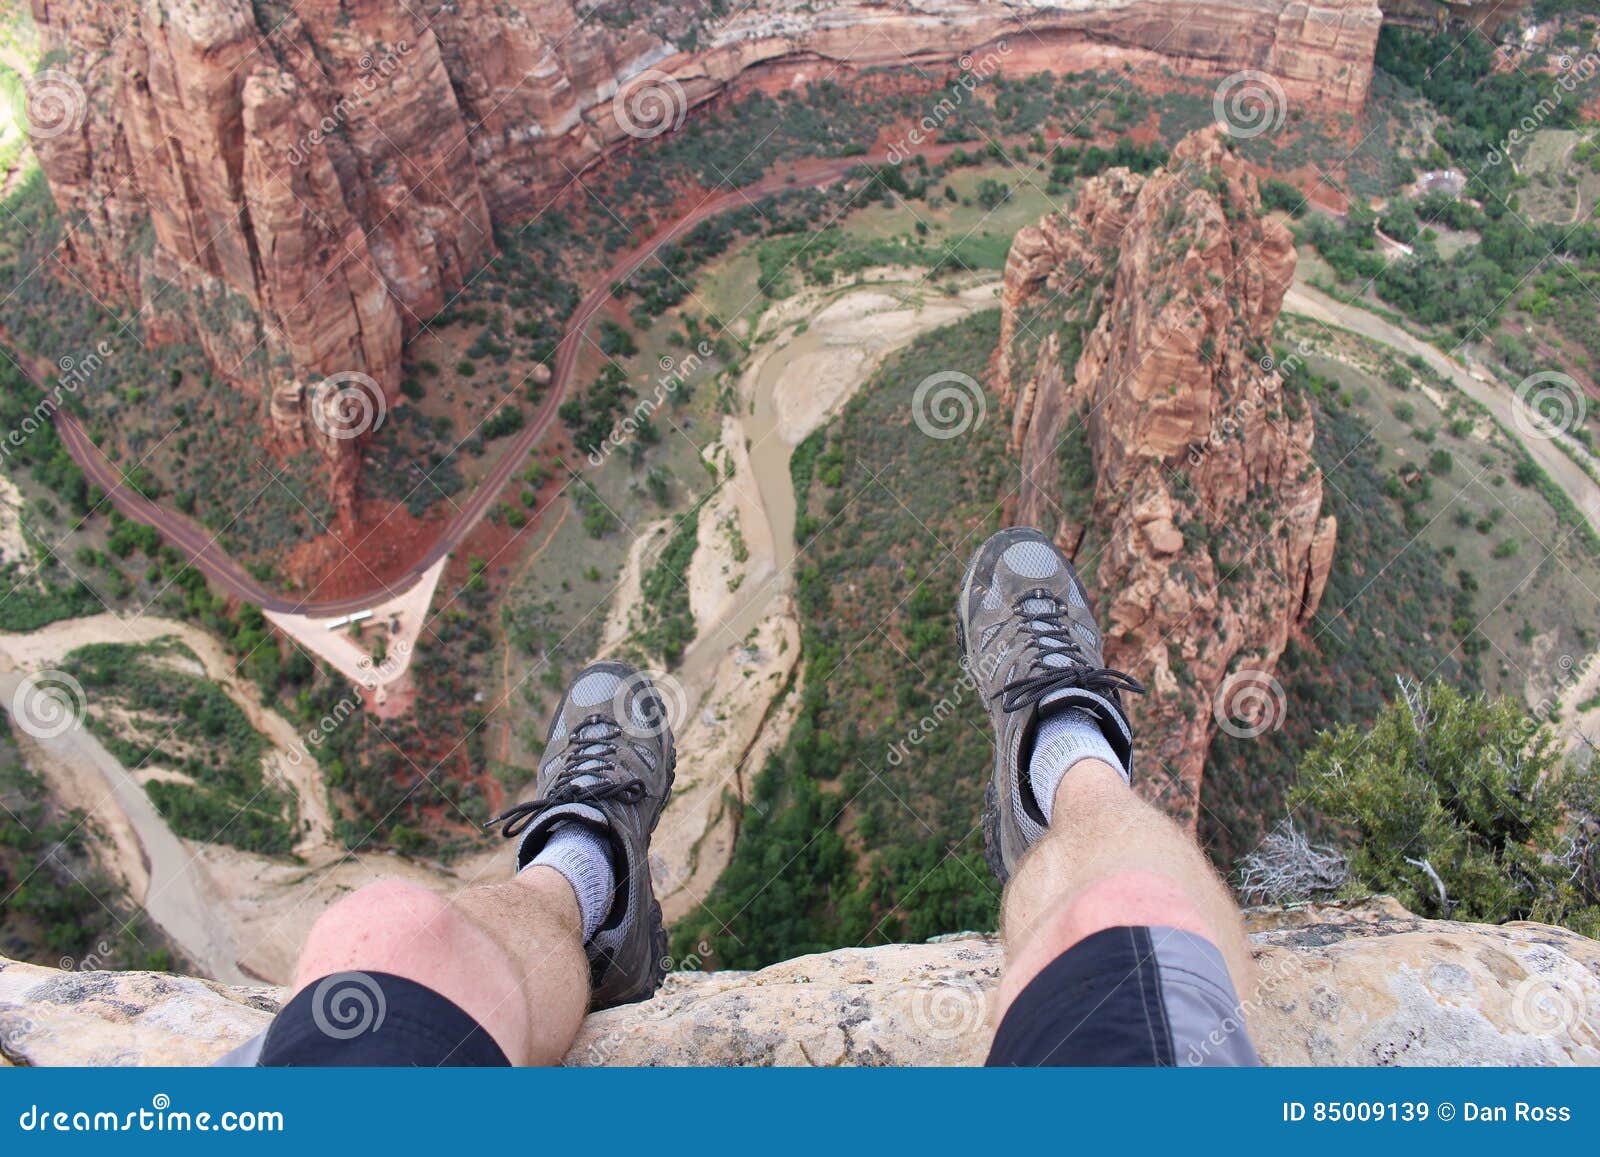 first person perspective shot from a hiker sitting at the edge of a cliff in zion national park.